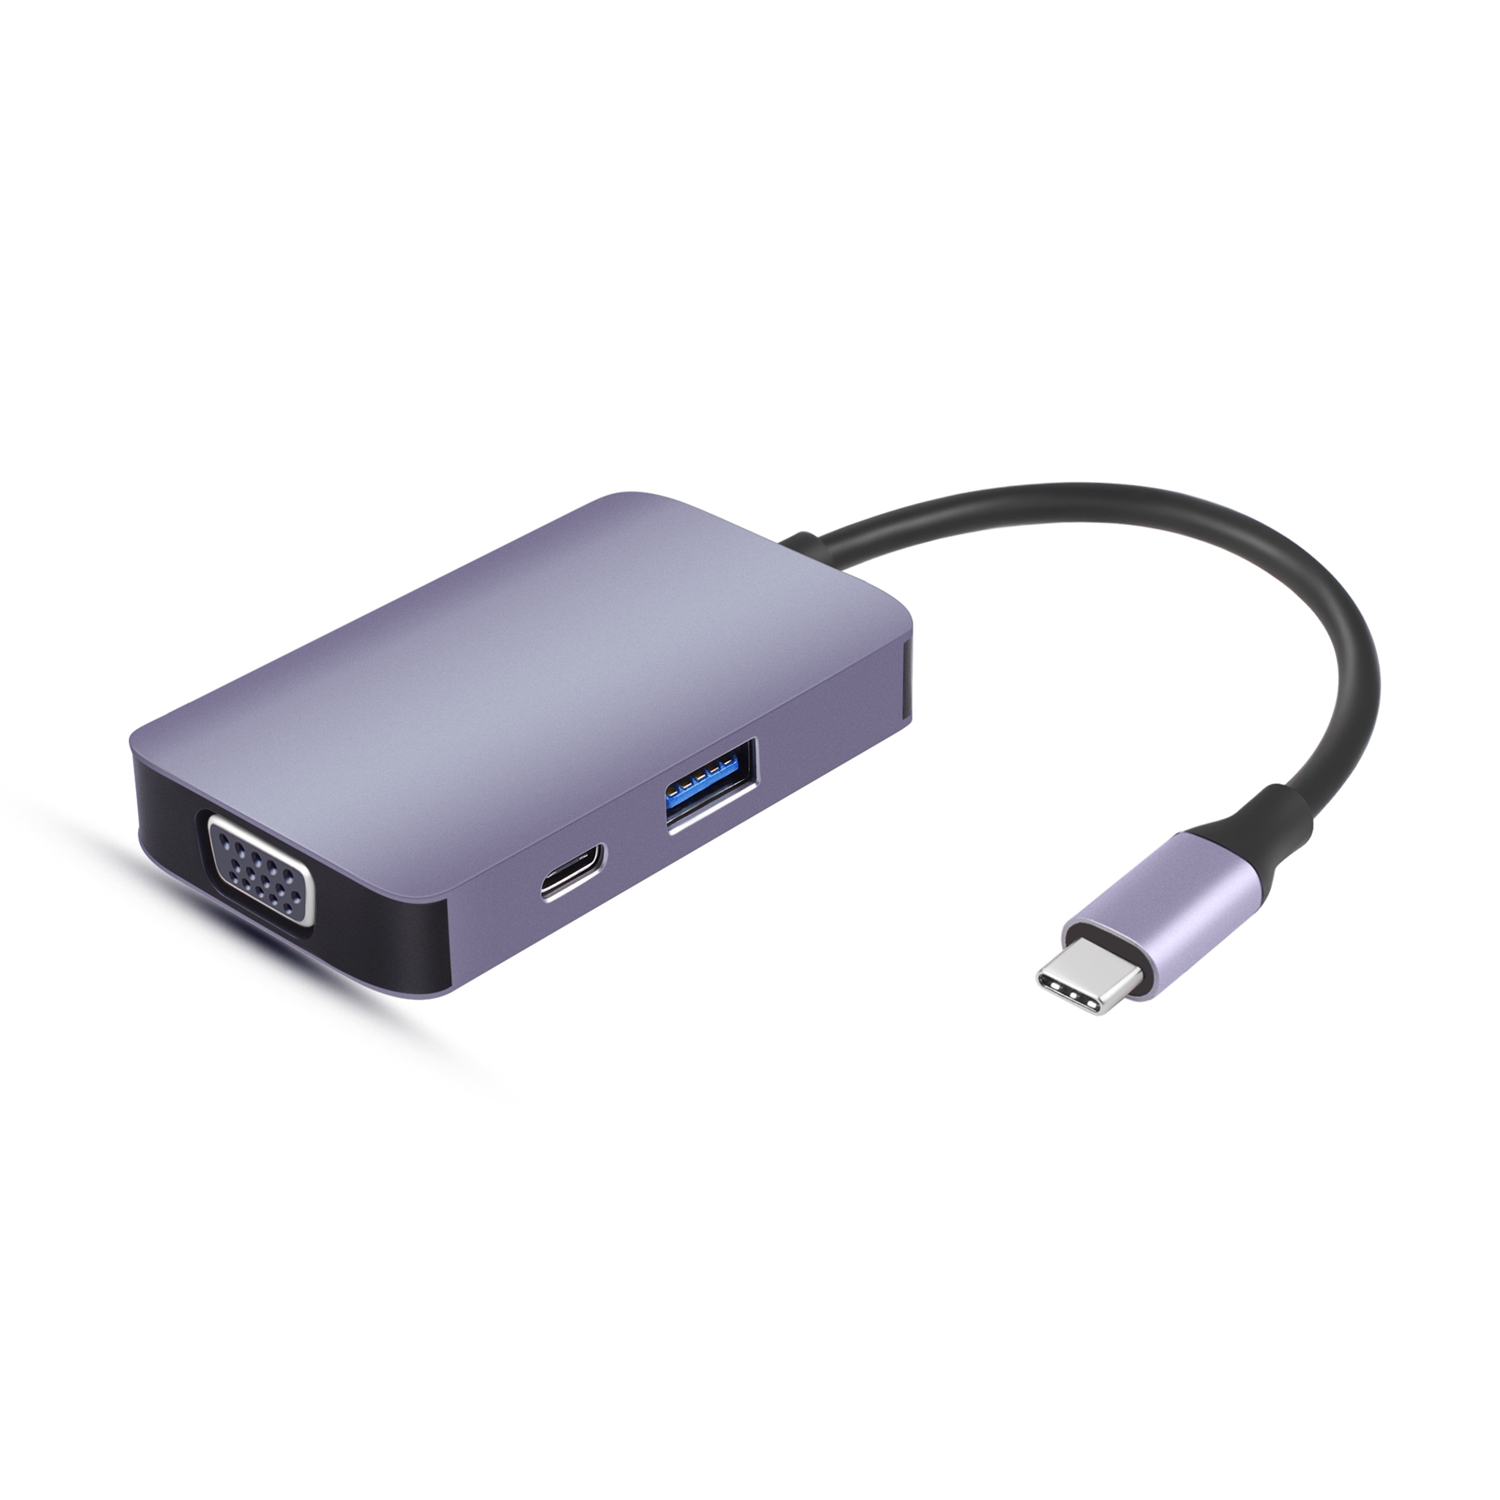 5 IN 1 USB-C Adapter with HDMII,100 W PD,VGA,USB3.0,3.5mm Jack Featured Image